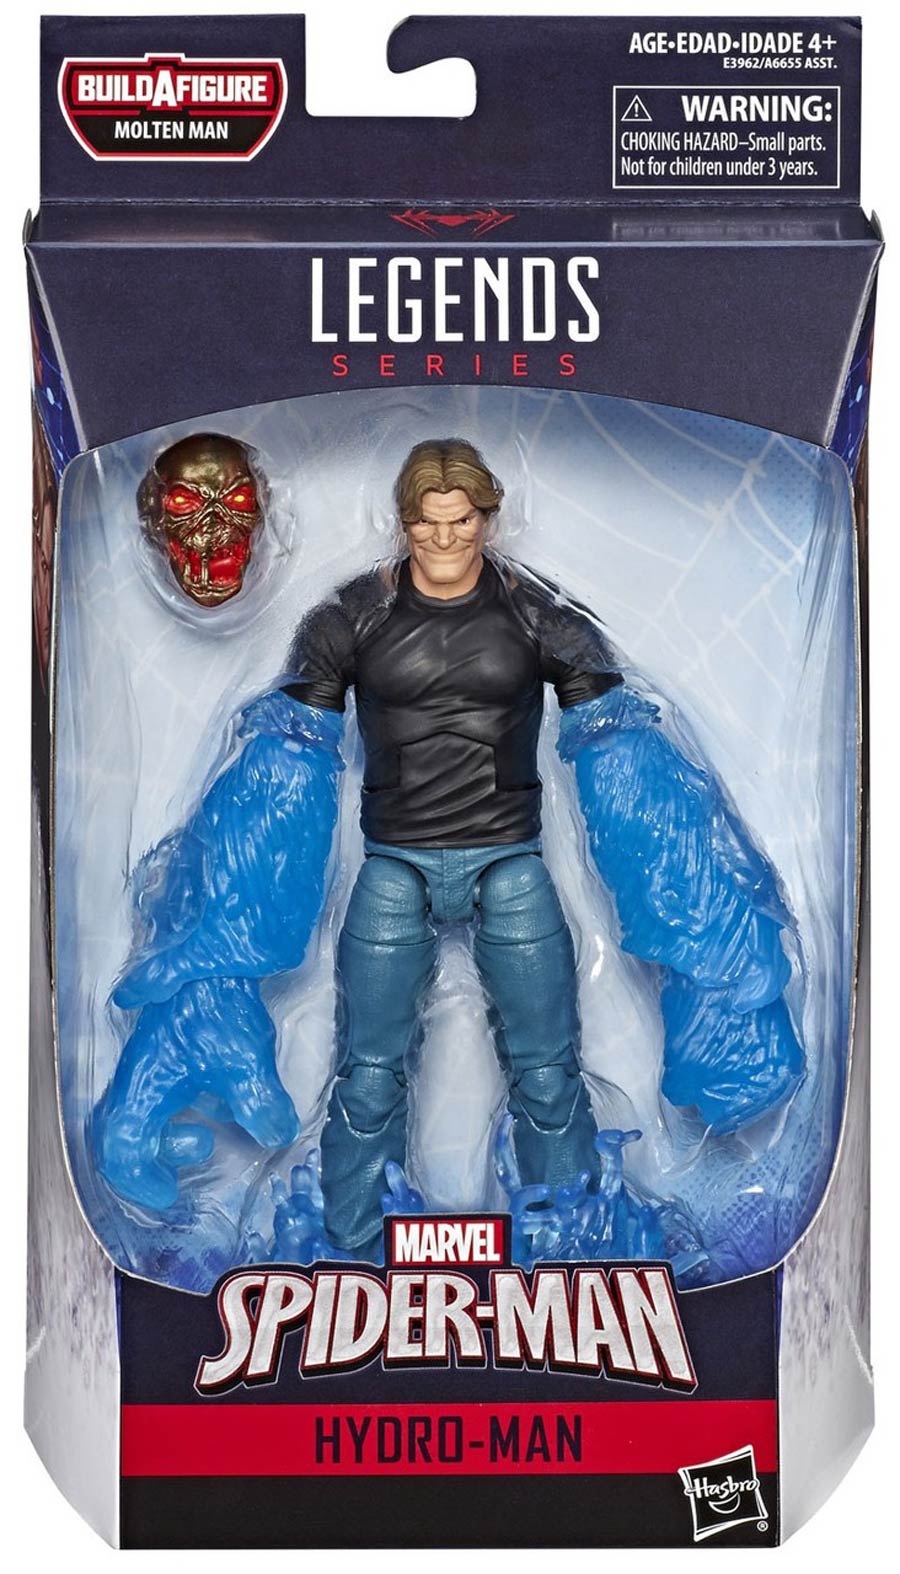 Spider-Man Far From Home Legends 2019 6-Inch Action Figure - Hydro-Man